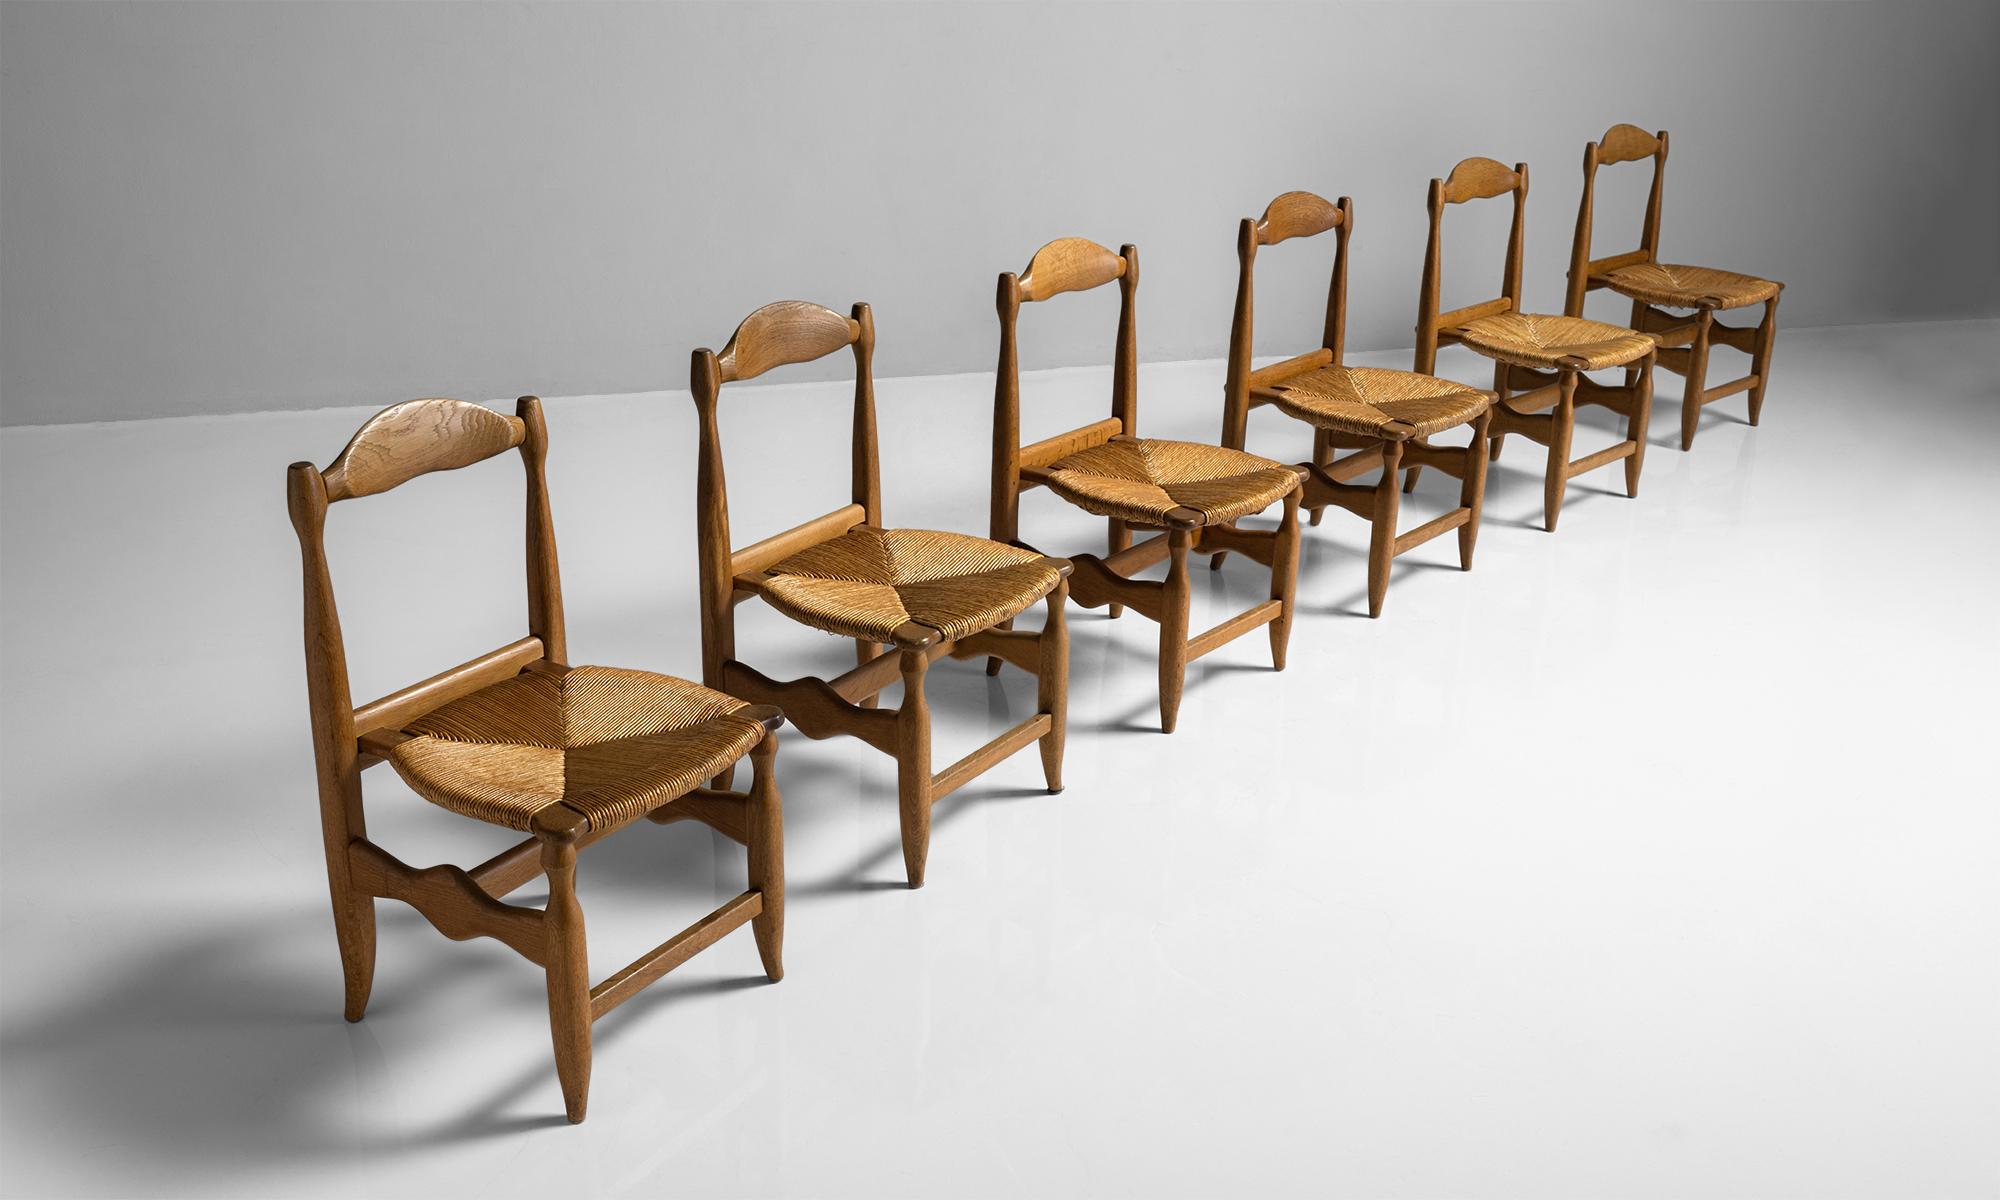 Guillerme & Chambron dining chairs set of six,

France, circa 1950

Votre Maison edition chairs with carved frame and rush seat.